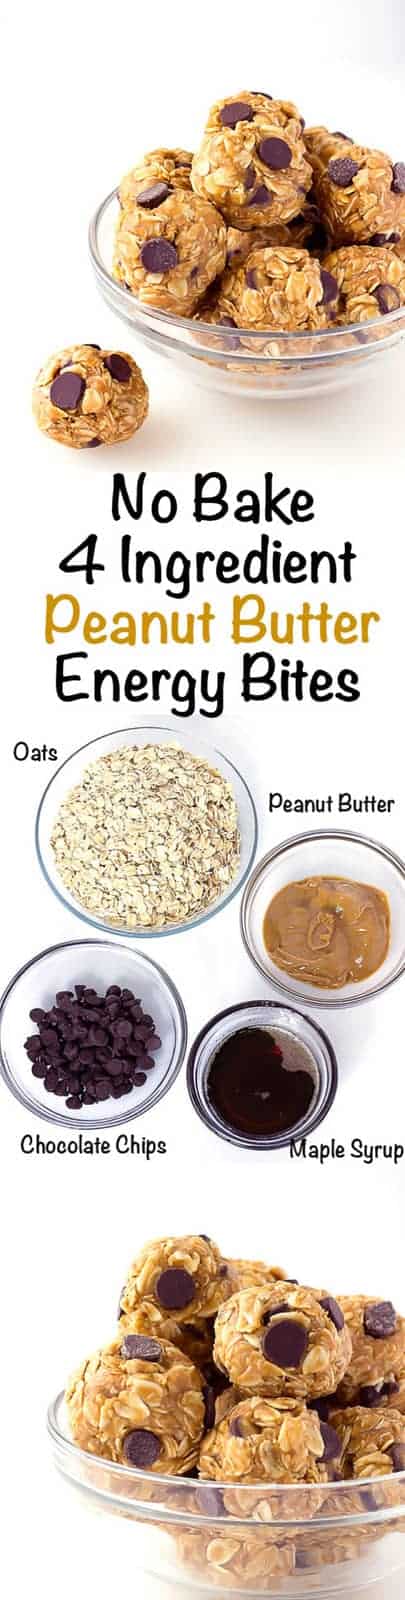 3 ingredient collage with text showing No Bake 4 Ingredient Energy Bites